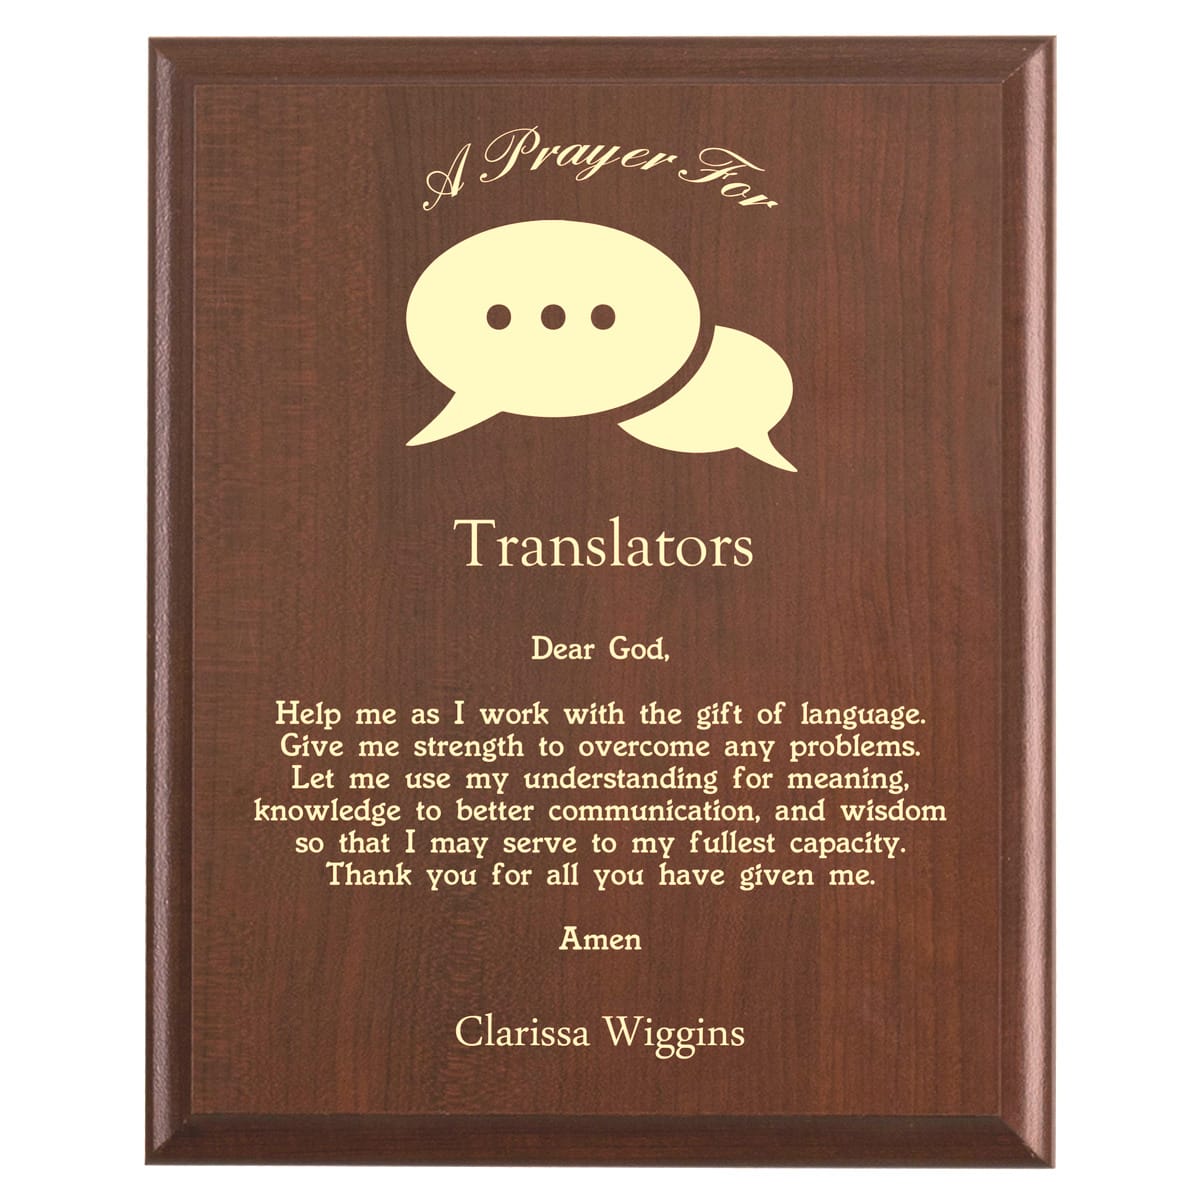 Plaque photo: Translator Prayer Plaque design with free personalization. Wood style finish with customized text.